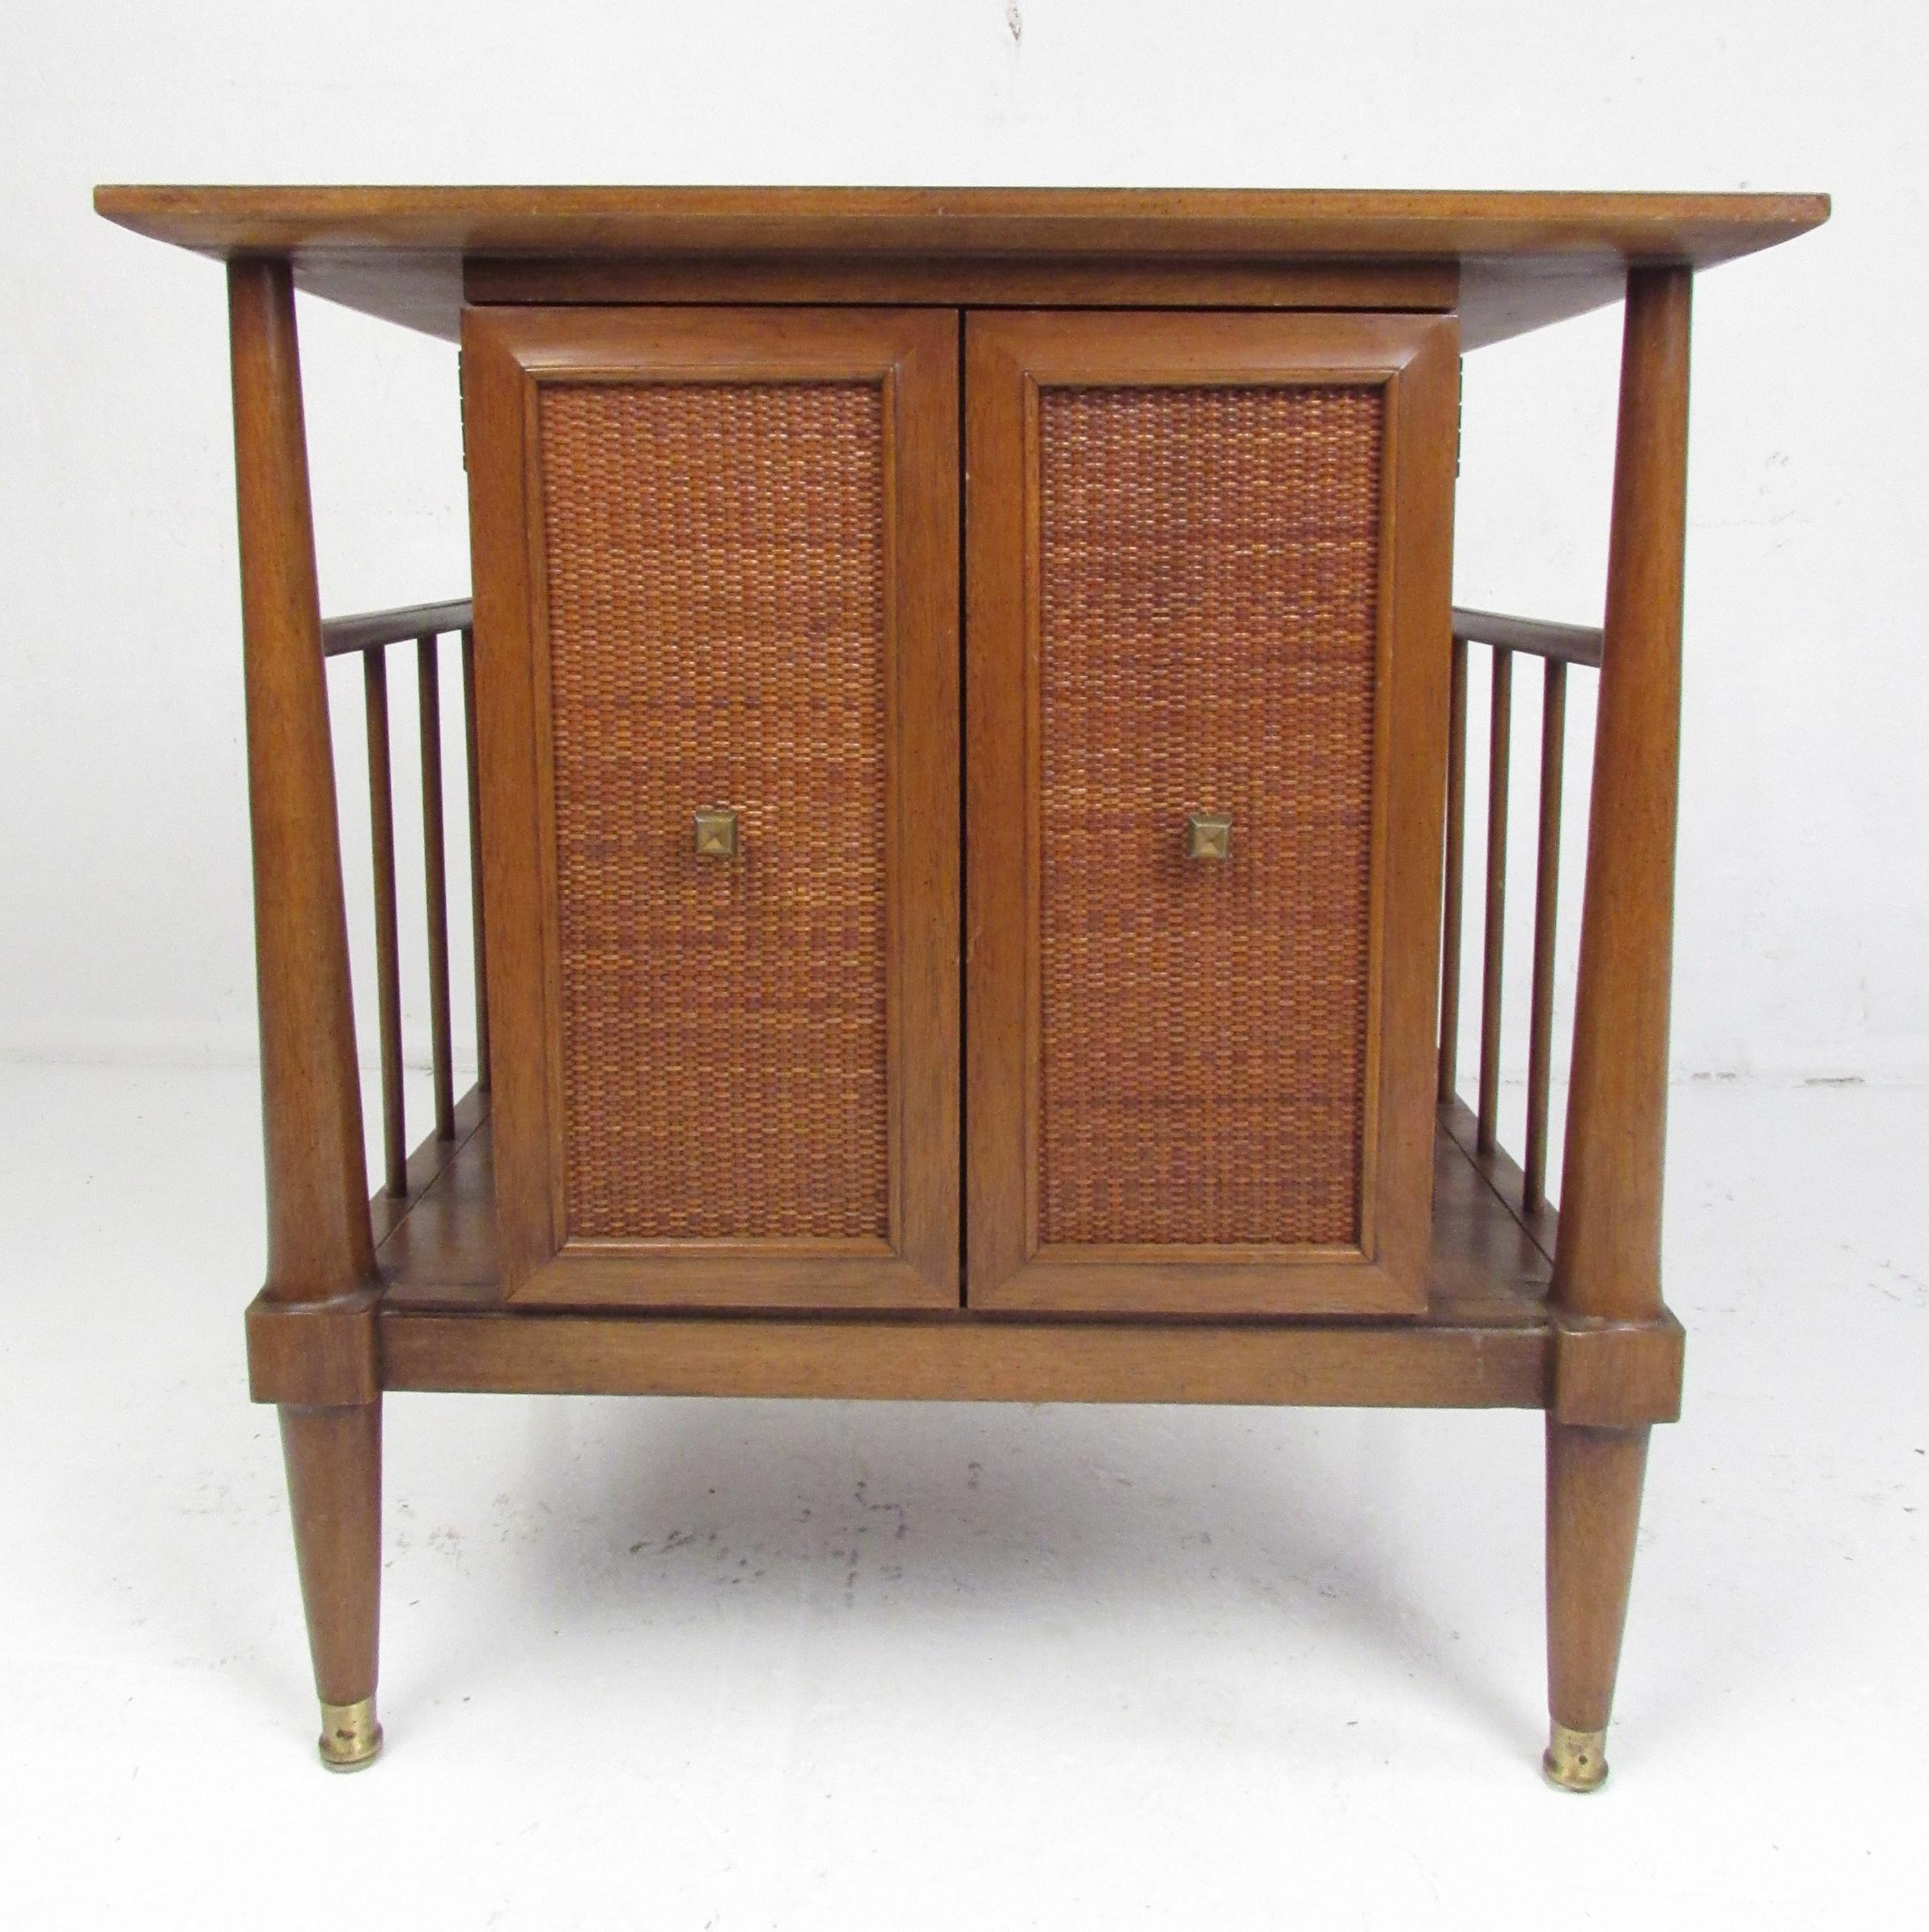 These end tables/nightstands feature beautiful walnut wood grain with attractive caned fronts with original brass pulls and capped feet. They provide ample storage, each with an open cabinet space behind two cane front doors and a single dovetailed